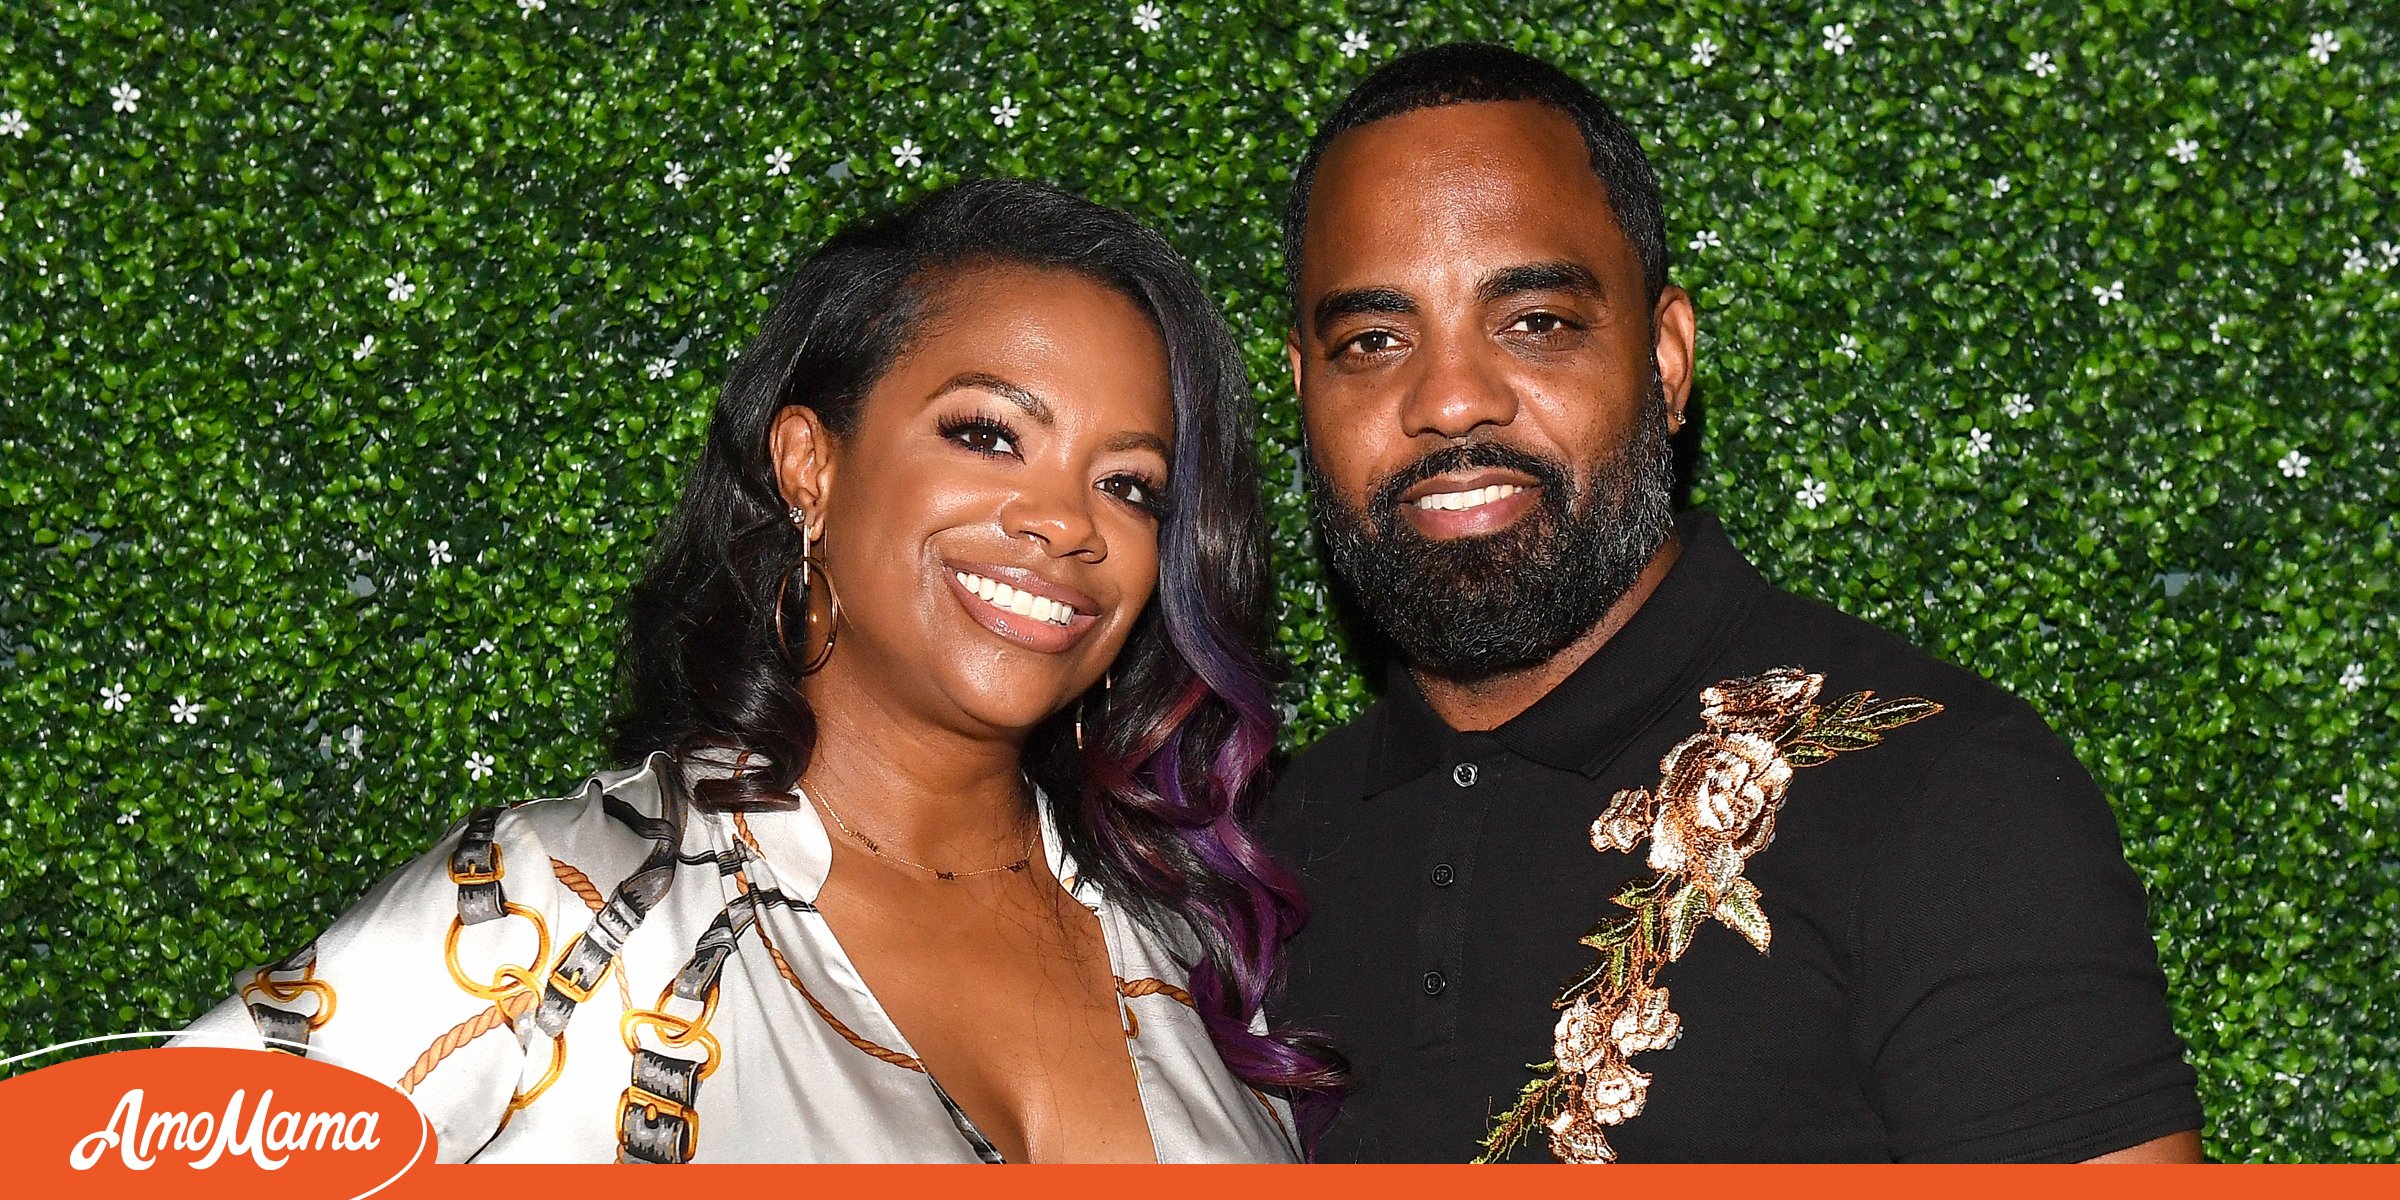 Kandi Burruss' Husband Is Also a Reality TV Personality More about